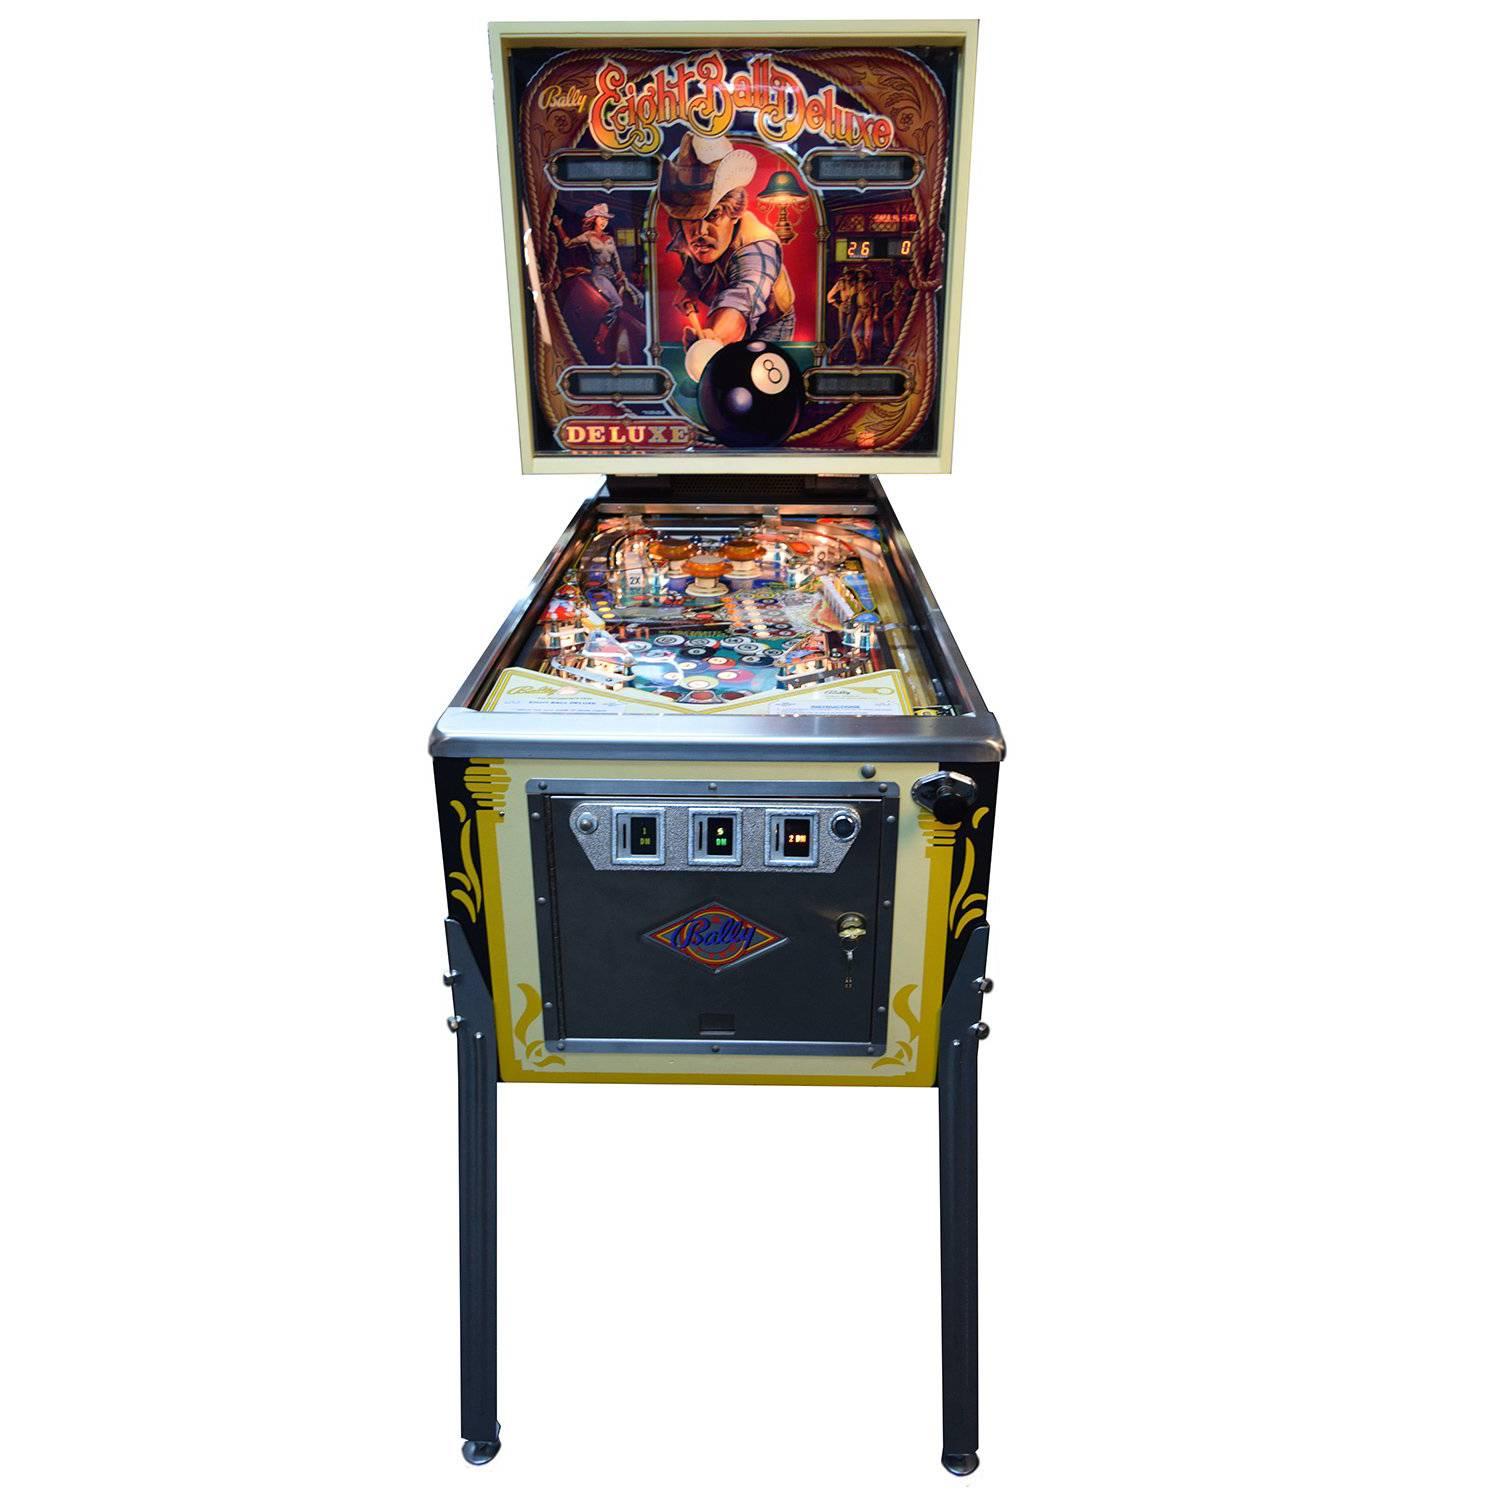 Bally Eight Ball Deluxe, Vintage Pinball Machine 1981, Restored For Sale